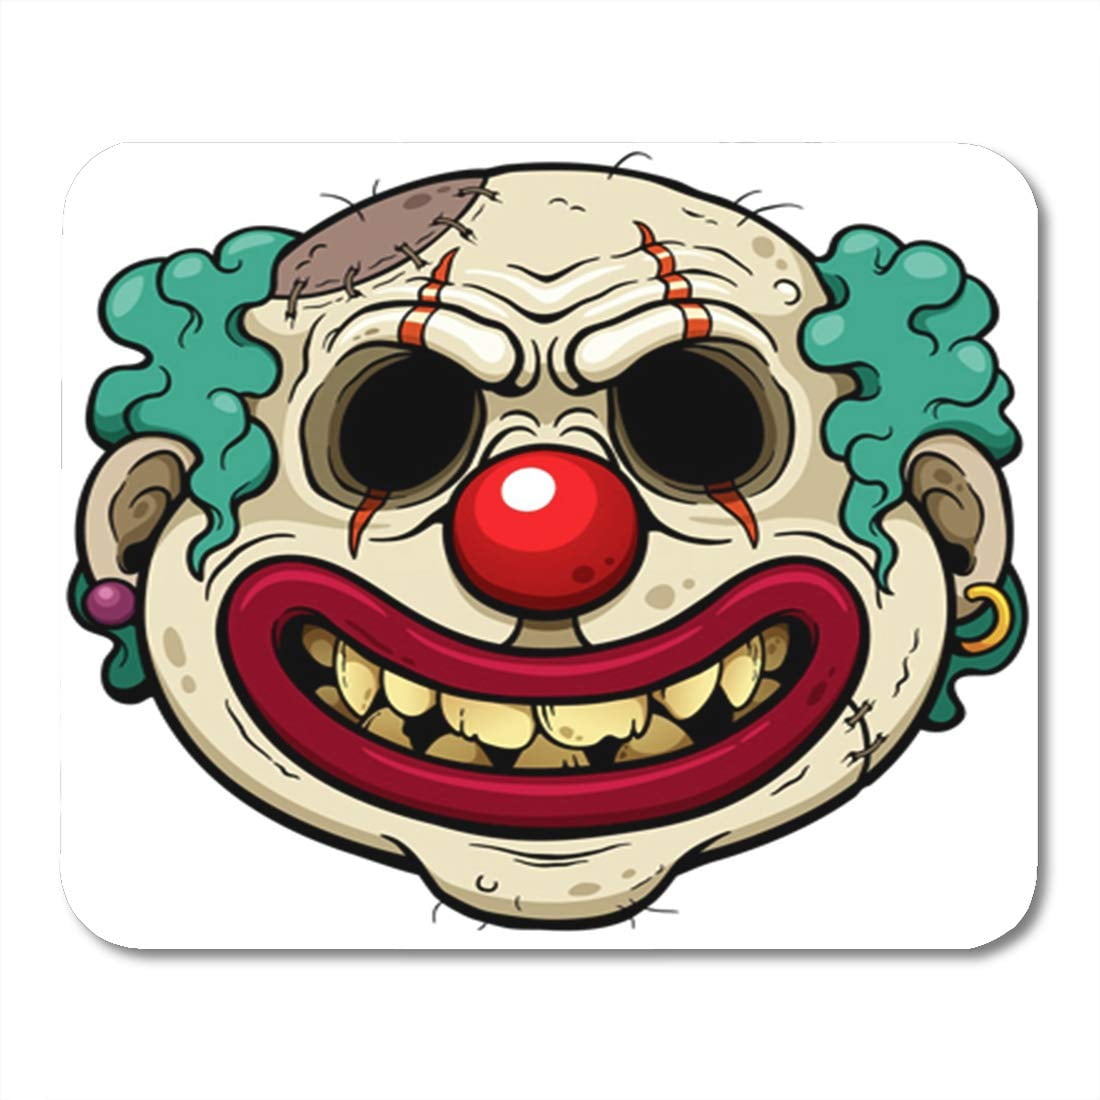 JSDART Colorful Horror of Cartoon Clown Zombie Face Joker Scary Evil Creepy  Adult Clip Mousepad Mouse Pad Mouse Mat 9x10 inch | Walmart Canada